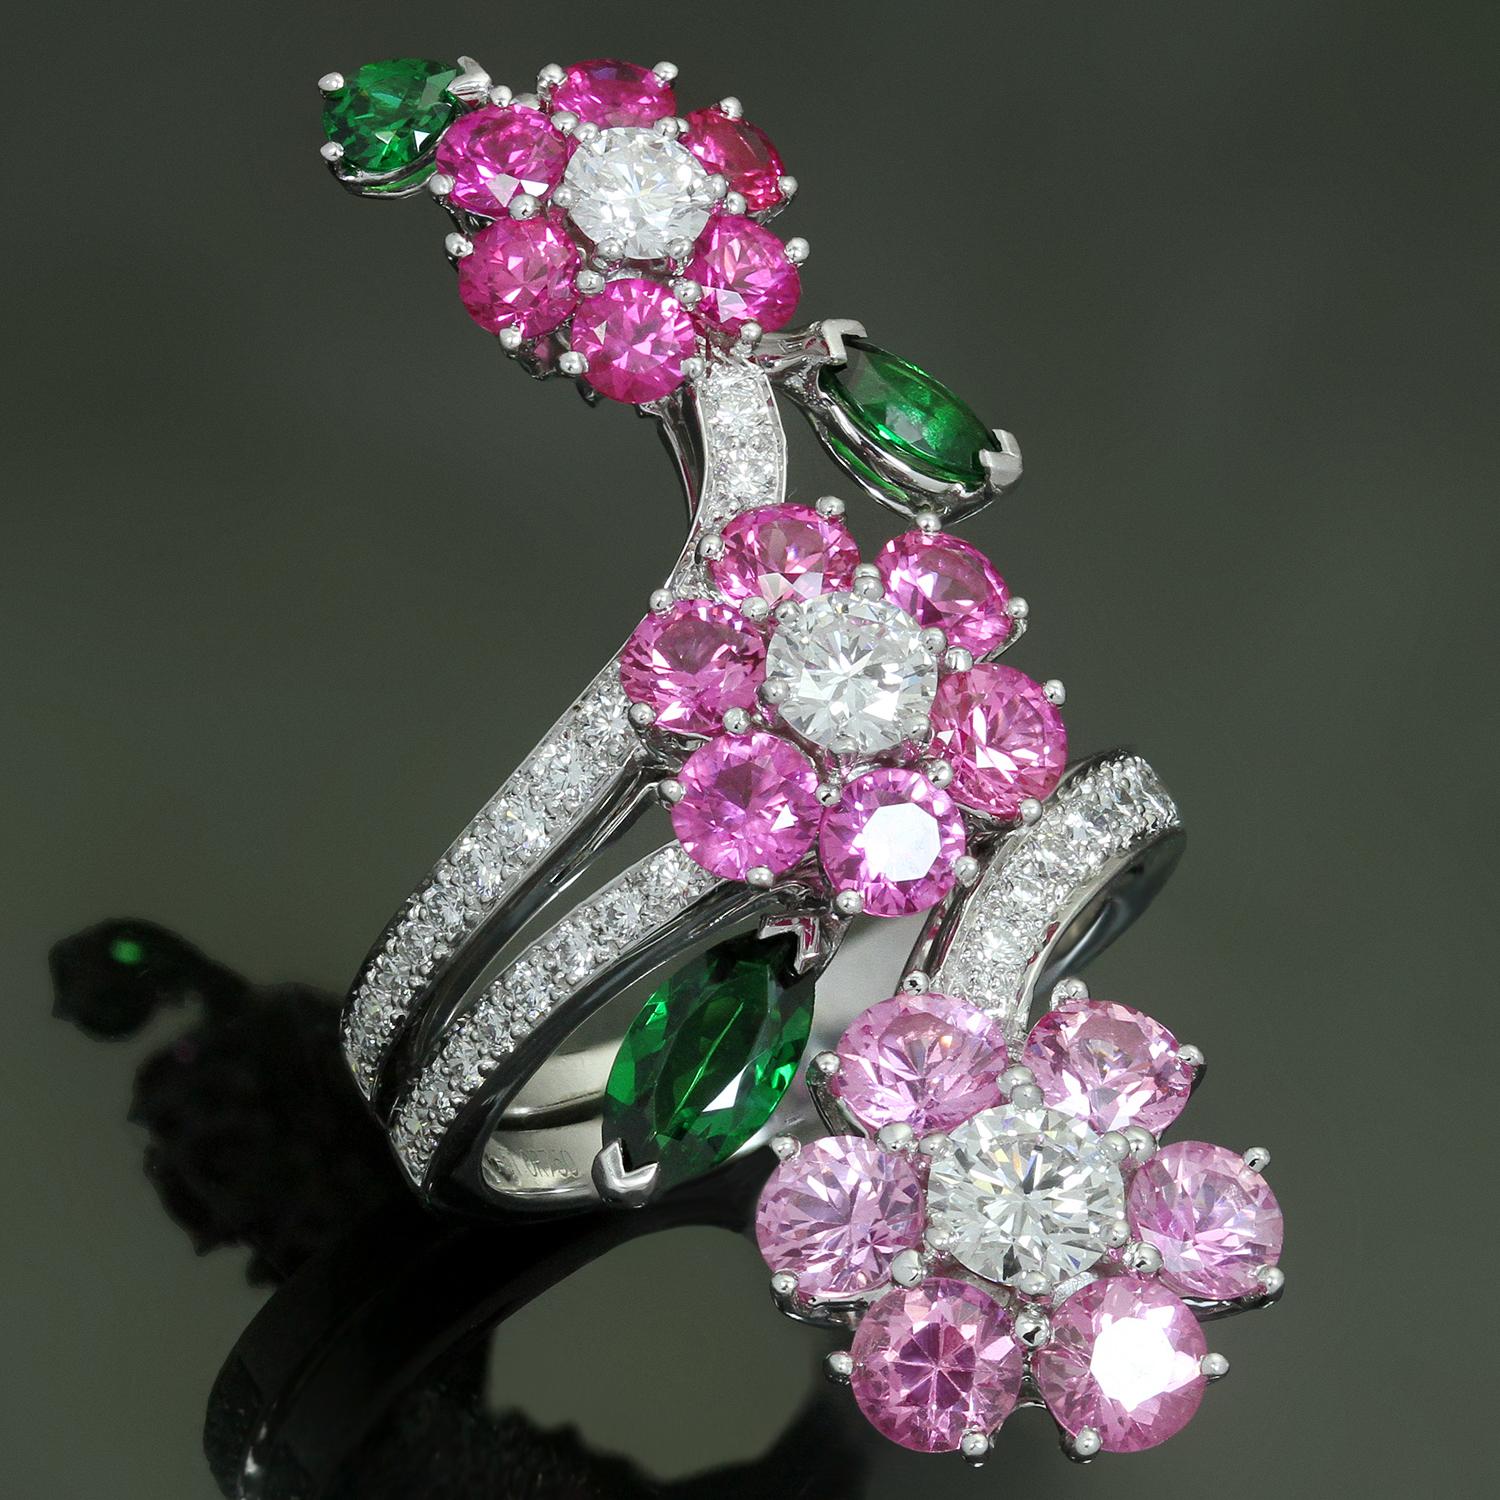 This magnificent 3-flower ring from Van Cleef & Arpel's Folie des Pres collection is crafted in 18k white gold and features 18 pink sapphire petals in different shades of pink weighing approximately 3.0 carats, 3 vivid green tsavorite leaves of an